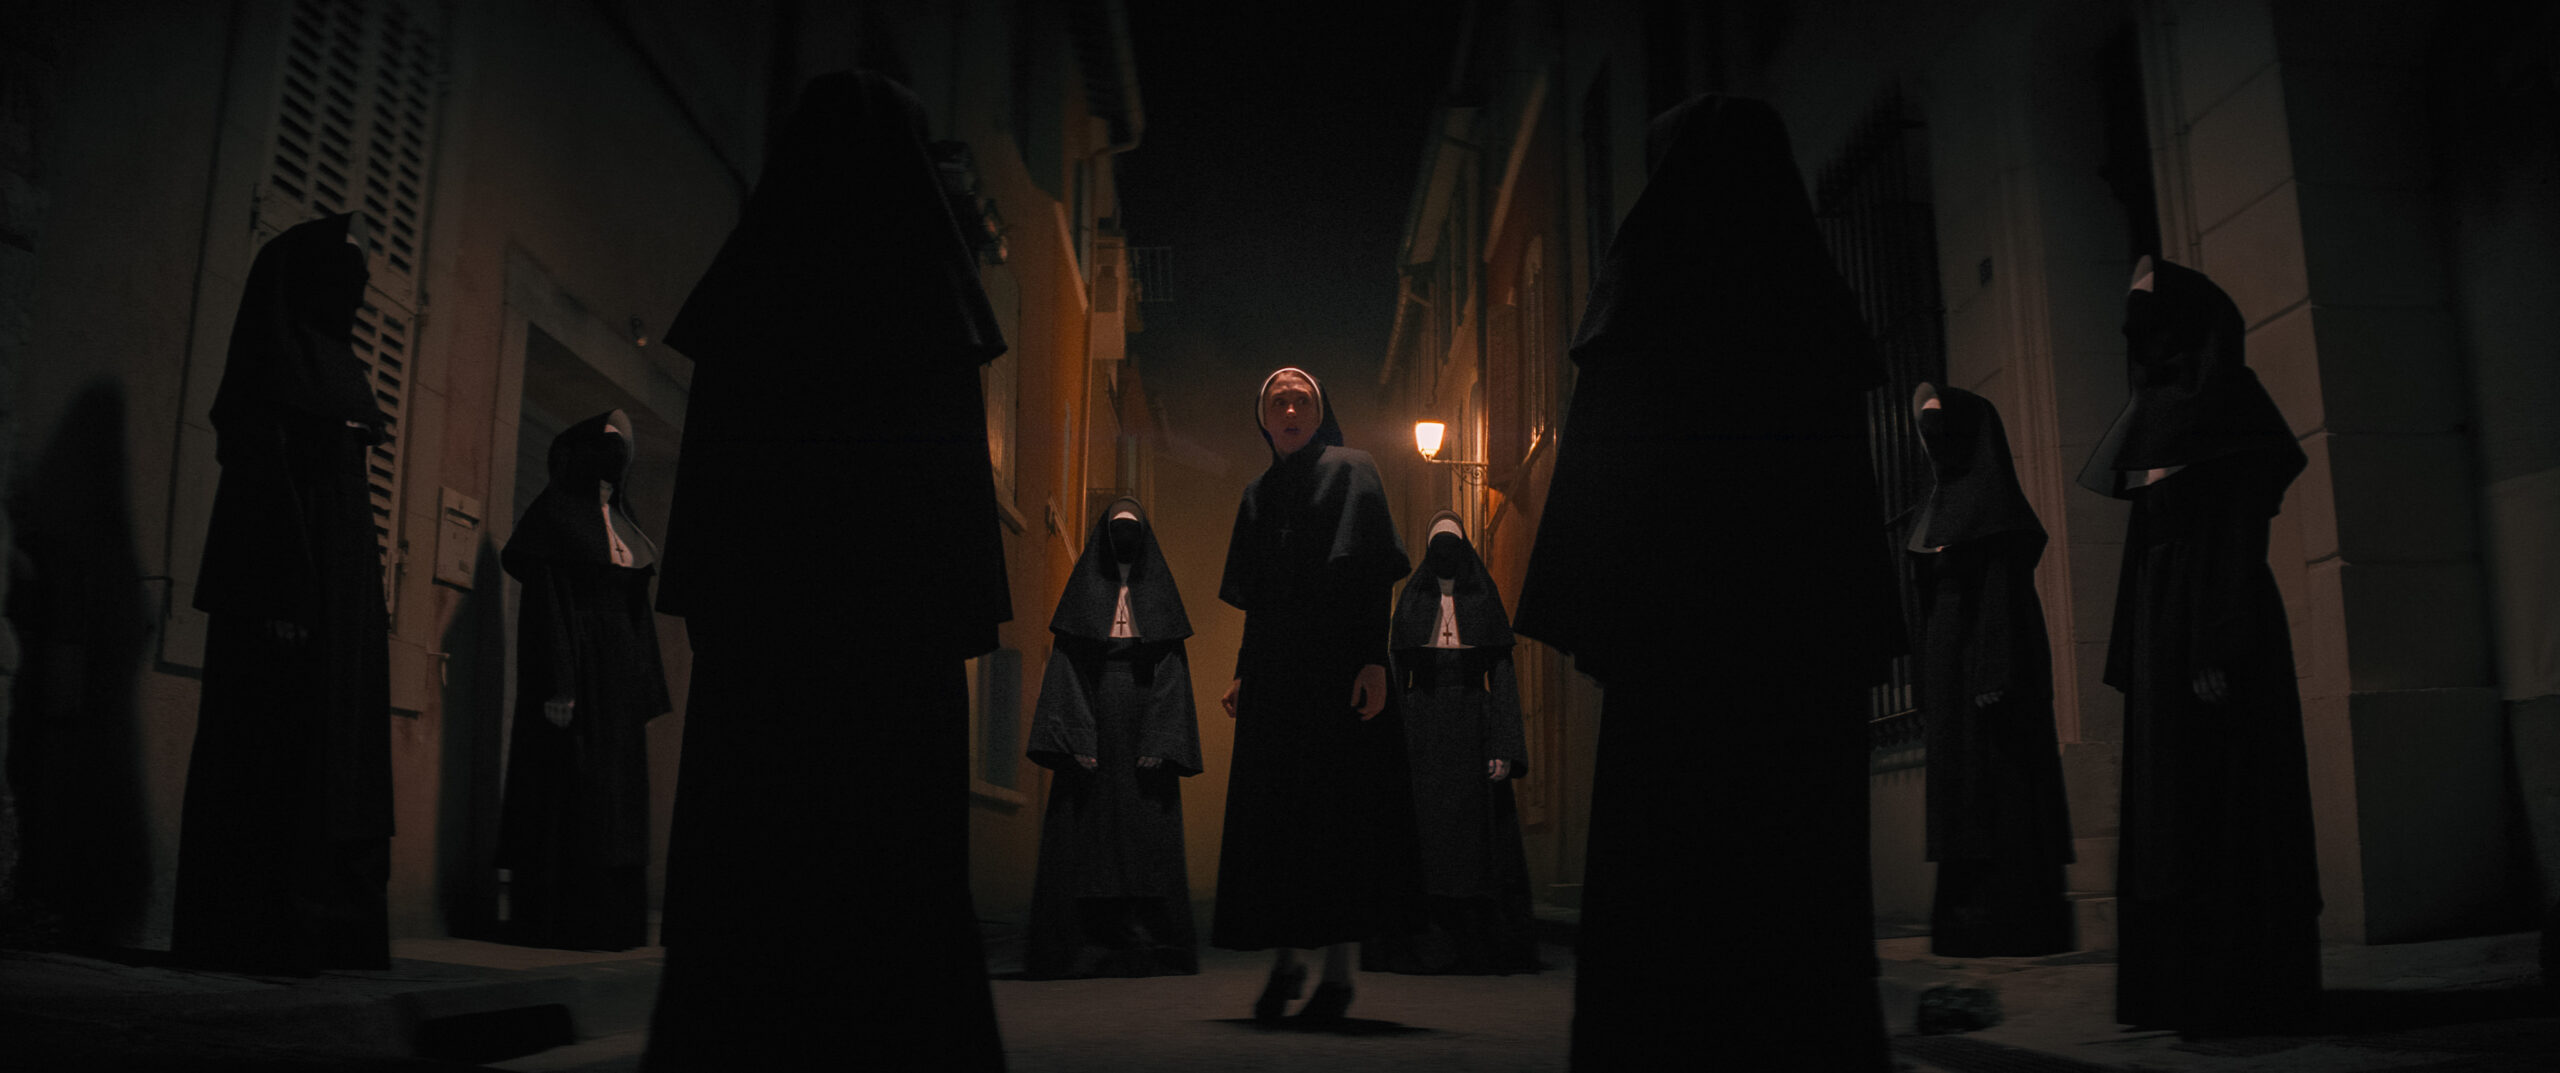 The Nun II Official Trailer Has Demonic Haunt Back For More Scares